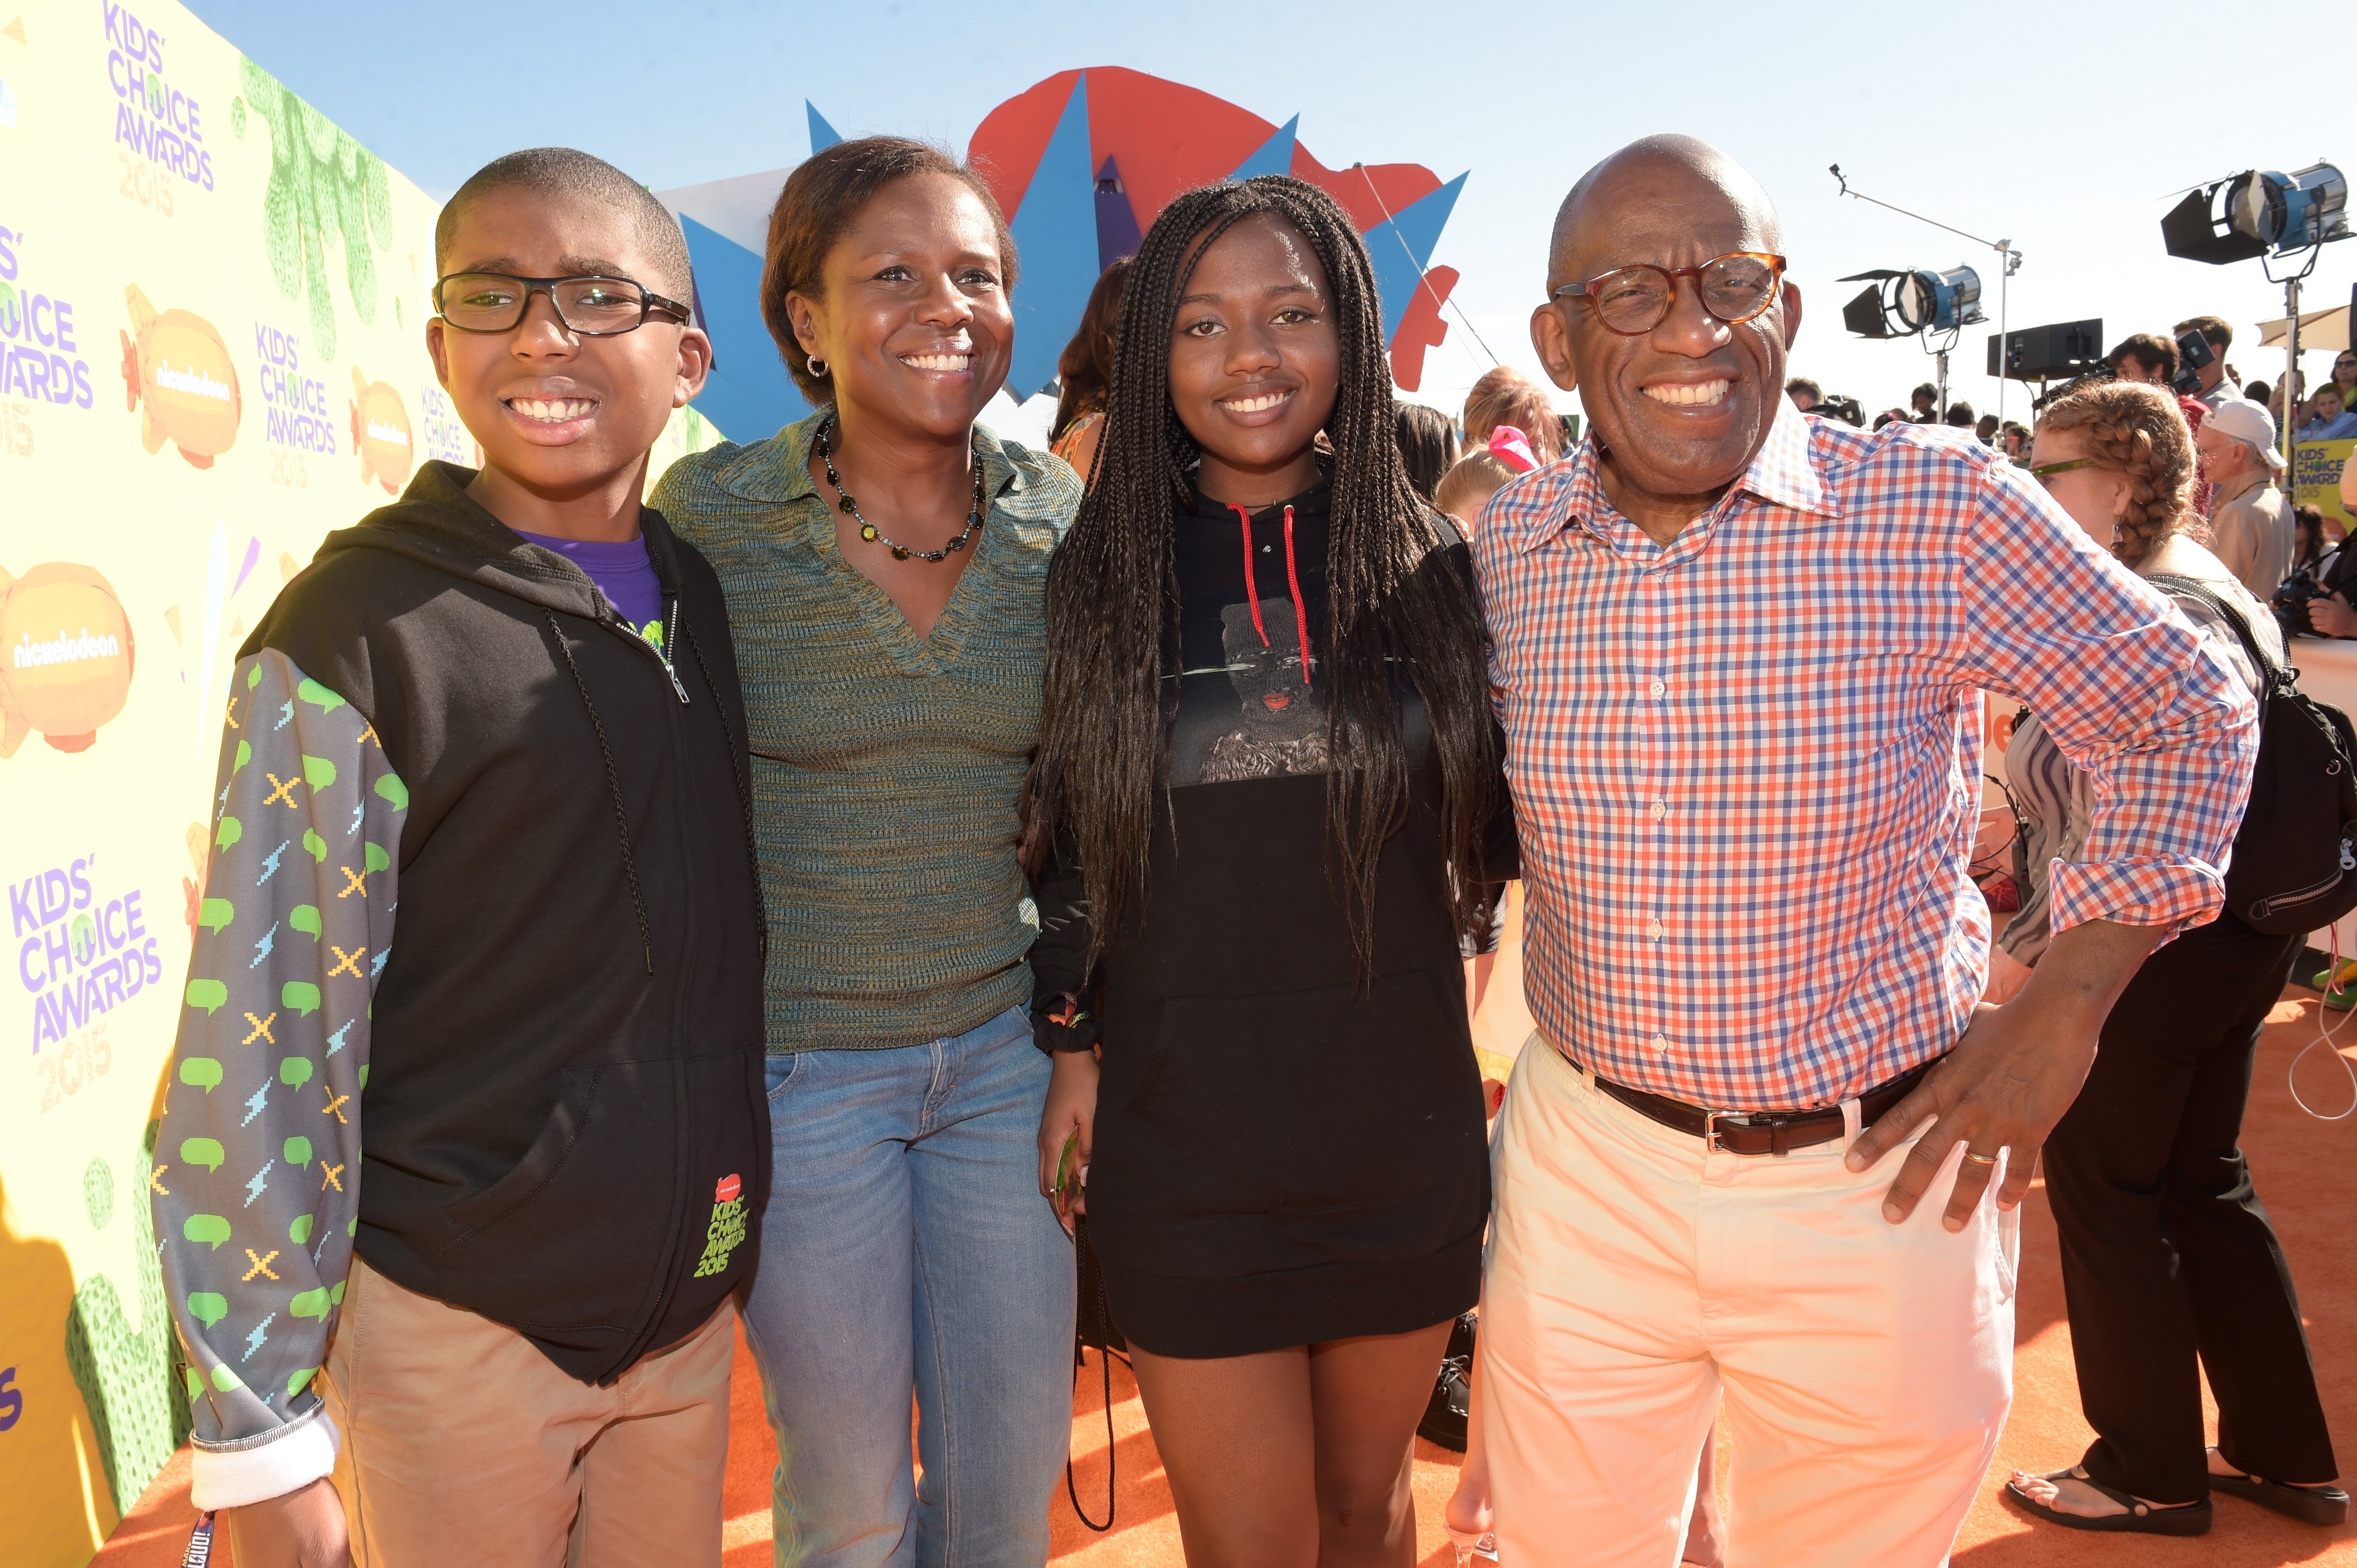 Al Roker with Nicholas Albert Roker, Deborah Roberts, and Leila Roker attend Nickelodeon's 28th Annual Kids' Choice Awards held at The Forum on March 28, 2015 in Inglewood, California | Source: Getty Images